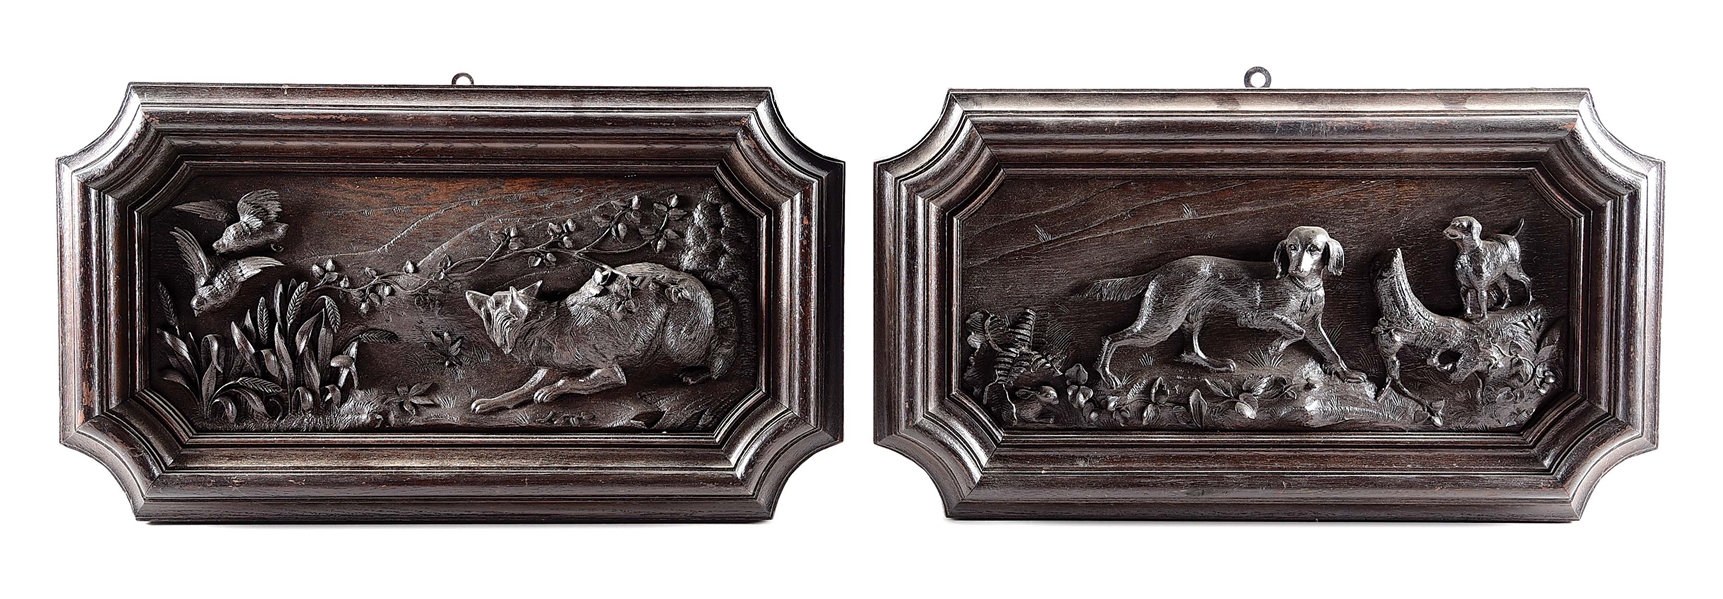 PAIR OF CARVED WOODEN GAME PLAQUES